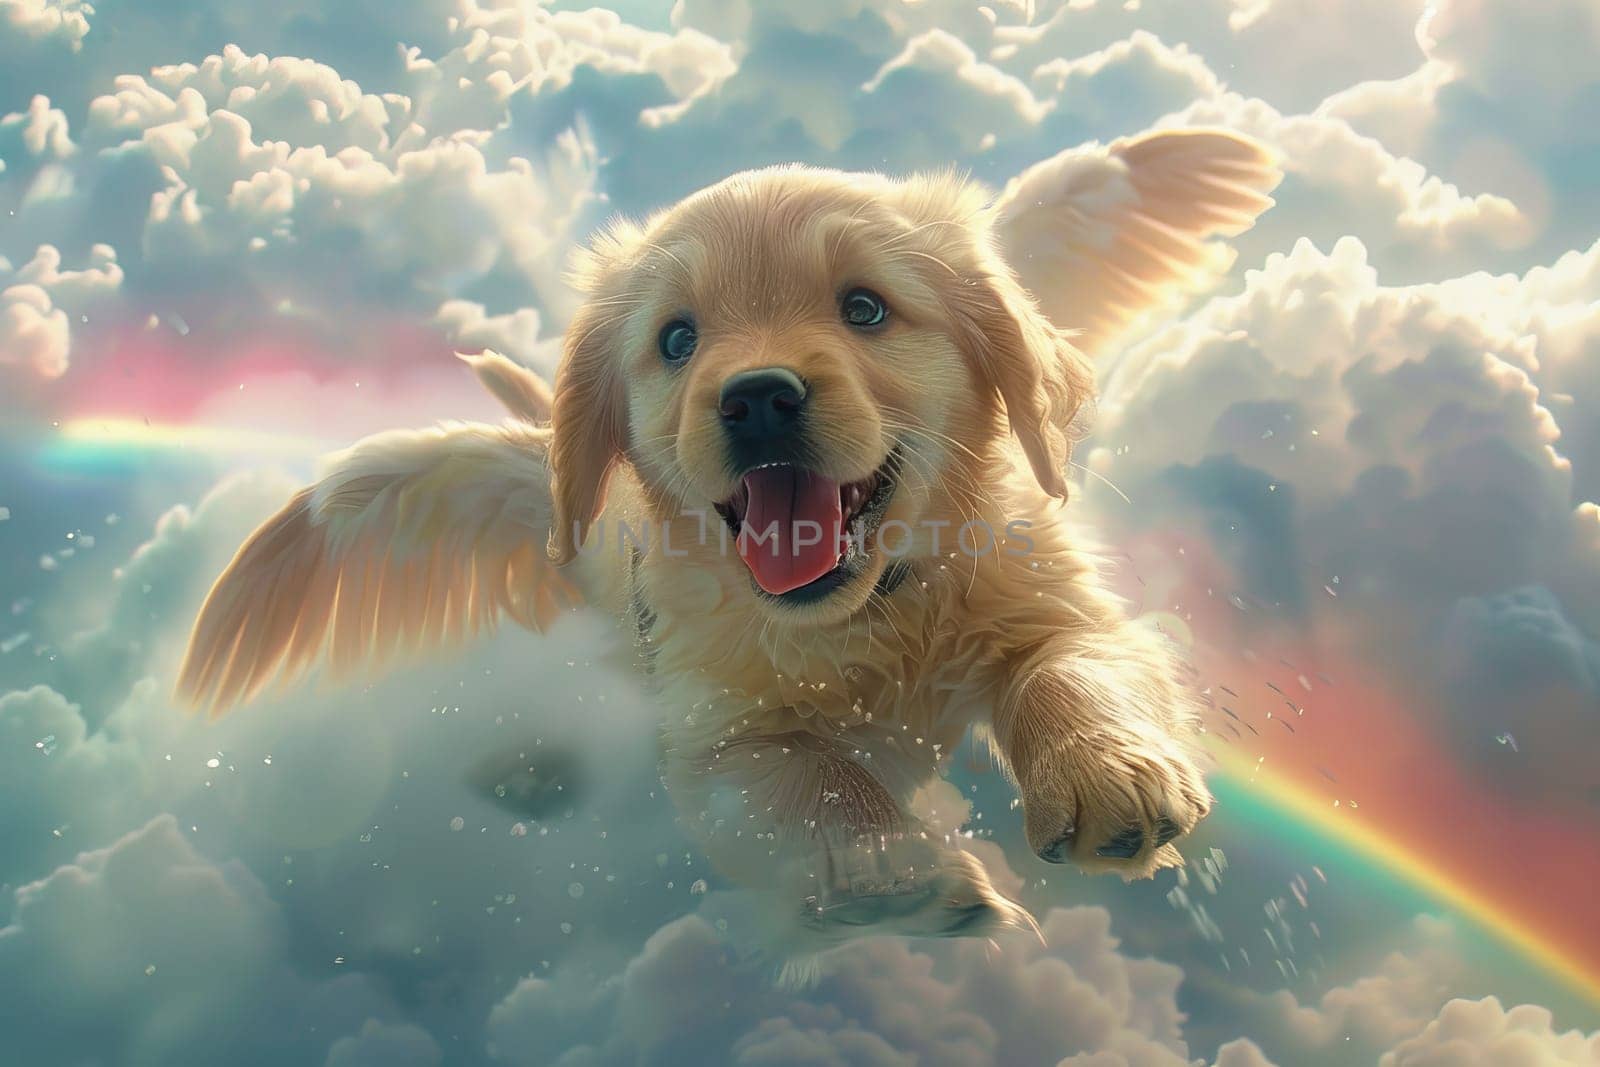 A small dog is flying through the sky with a rainbow in the background. Scene is joyful and playful, as the dog is having a great time soaring through the clouds